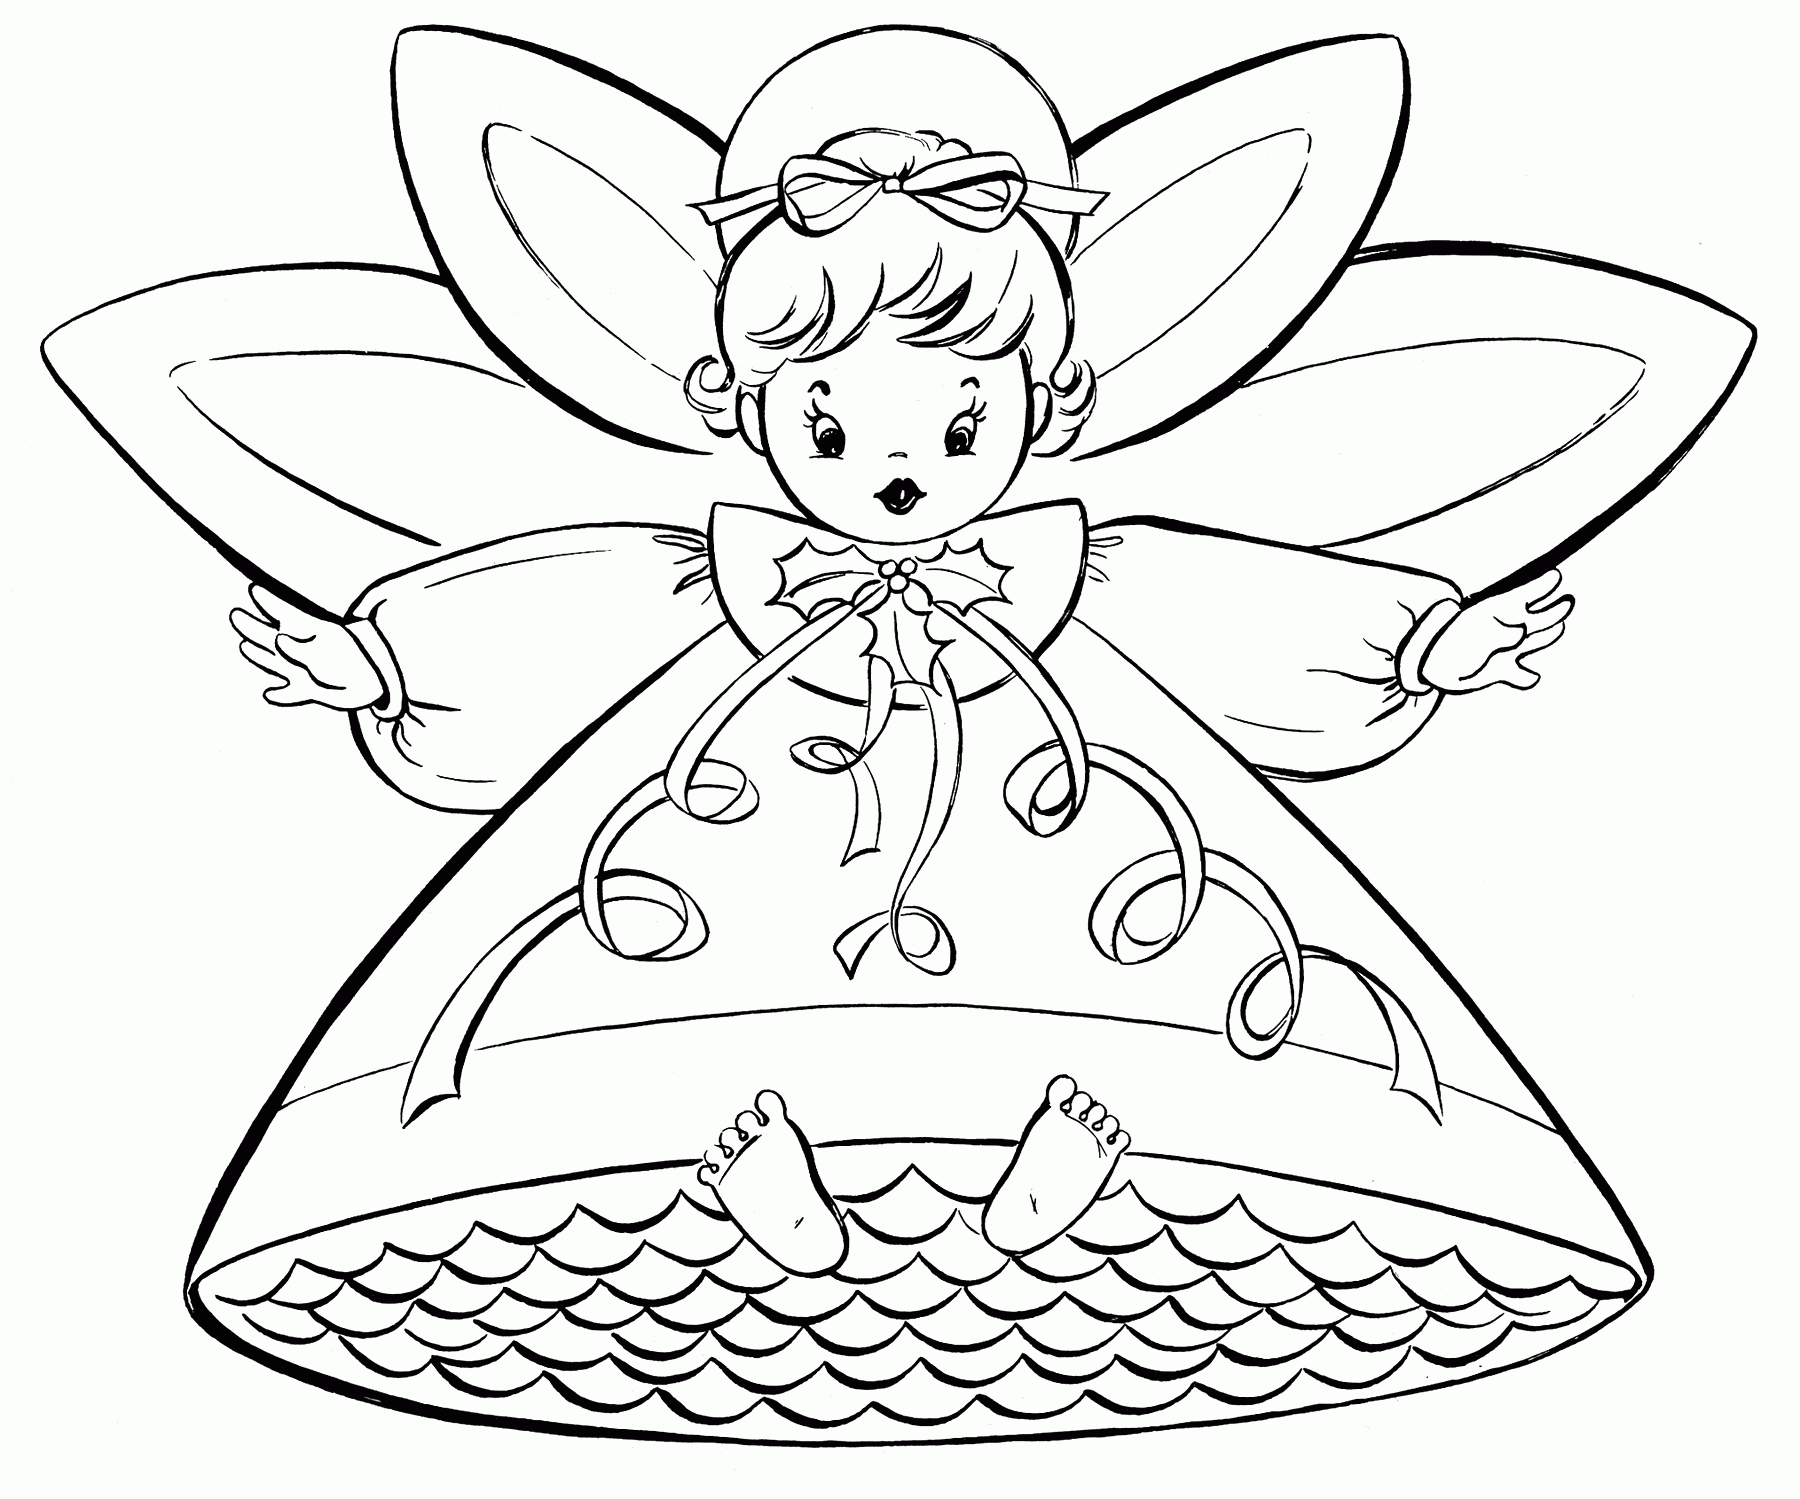 Free Christmas Coloring Pages - My Coloring